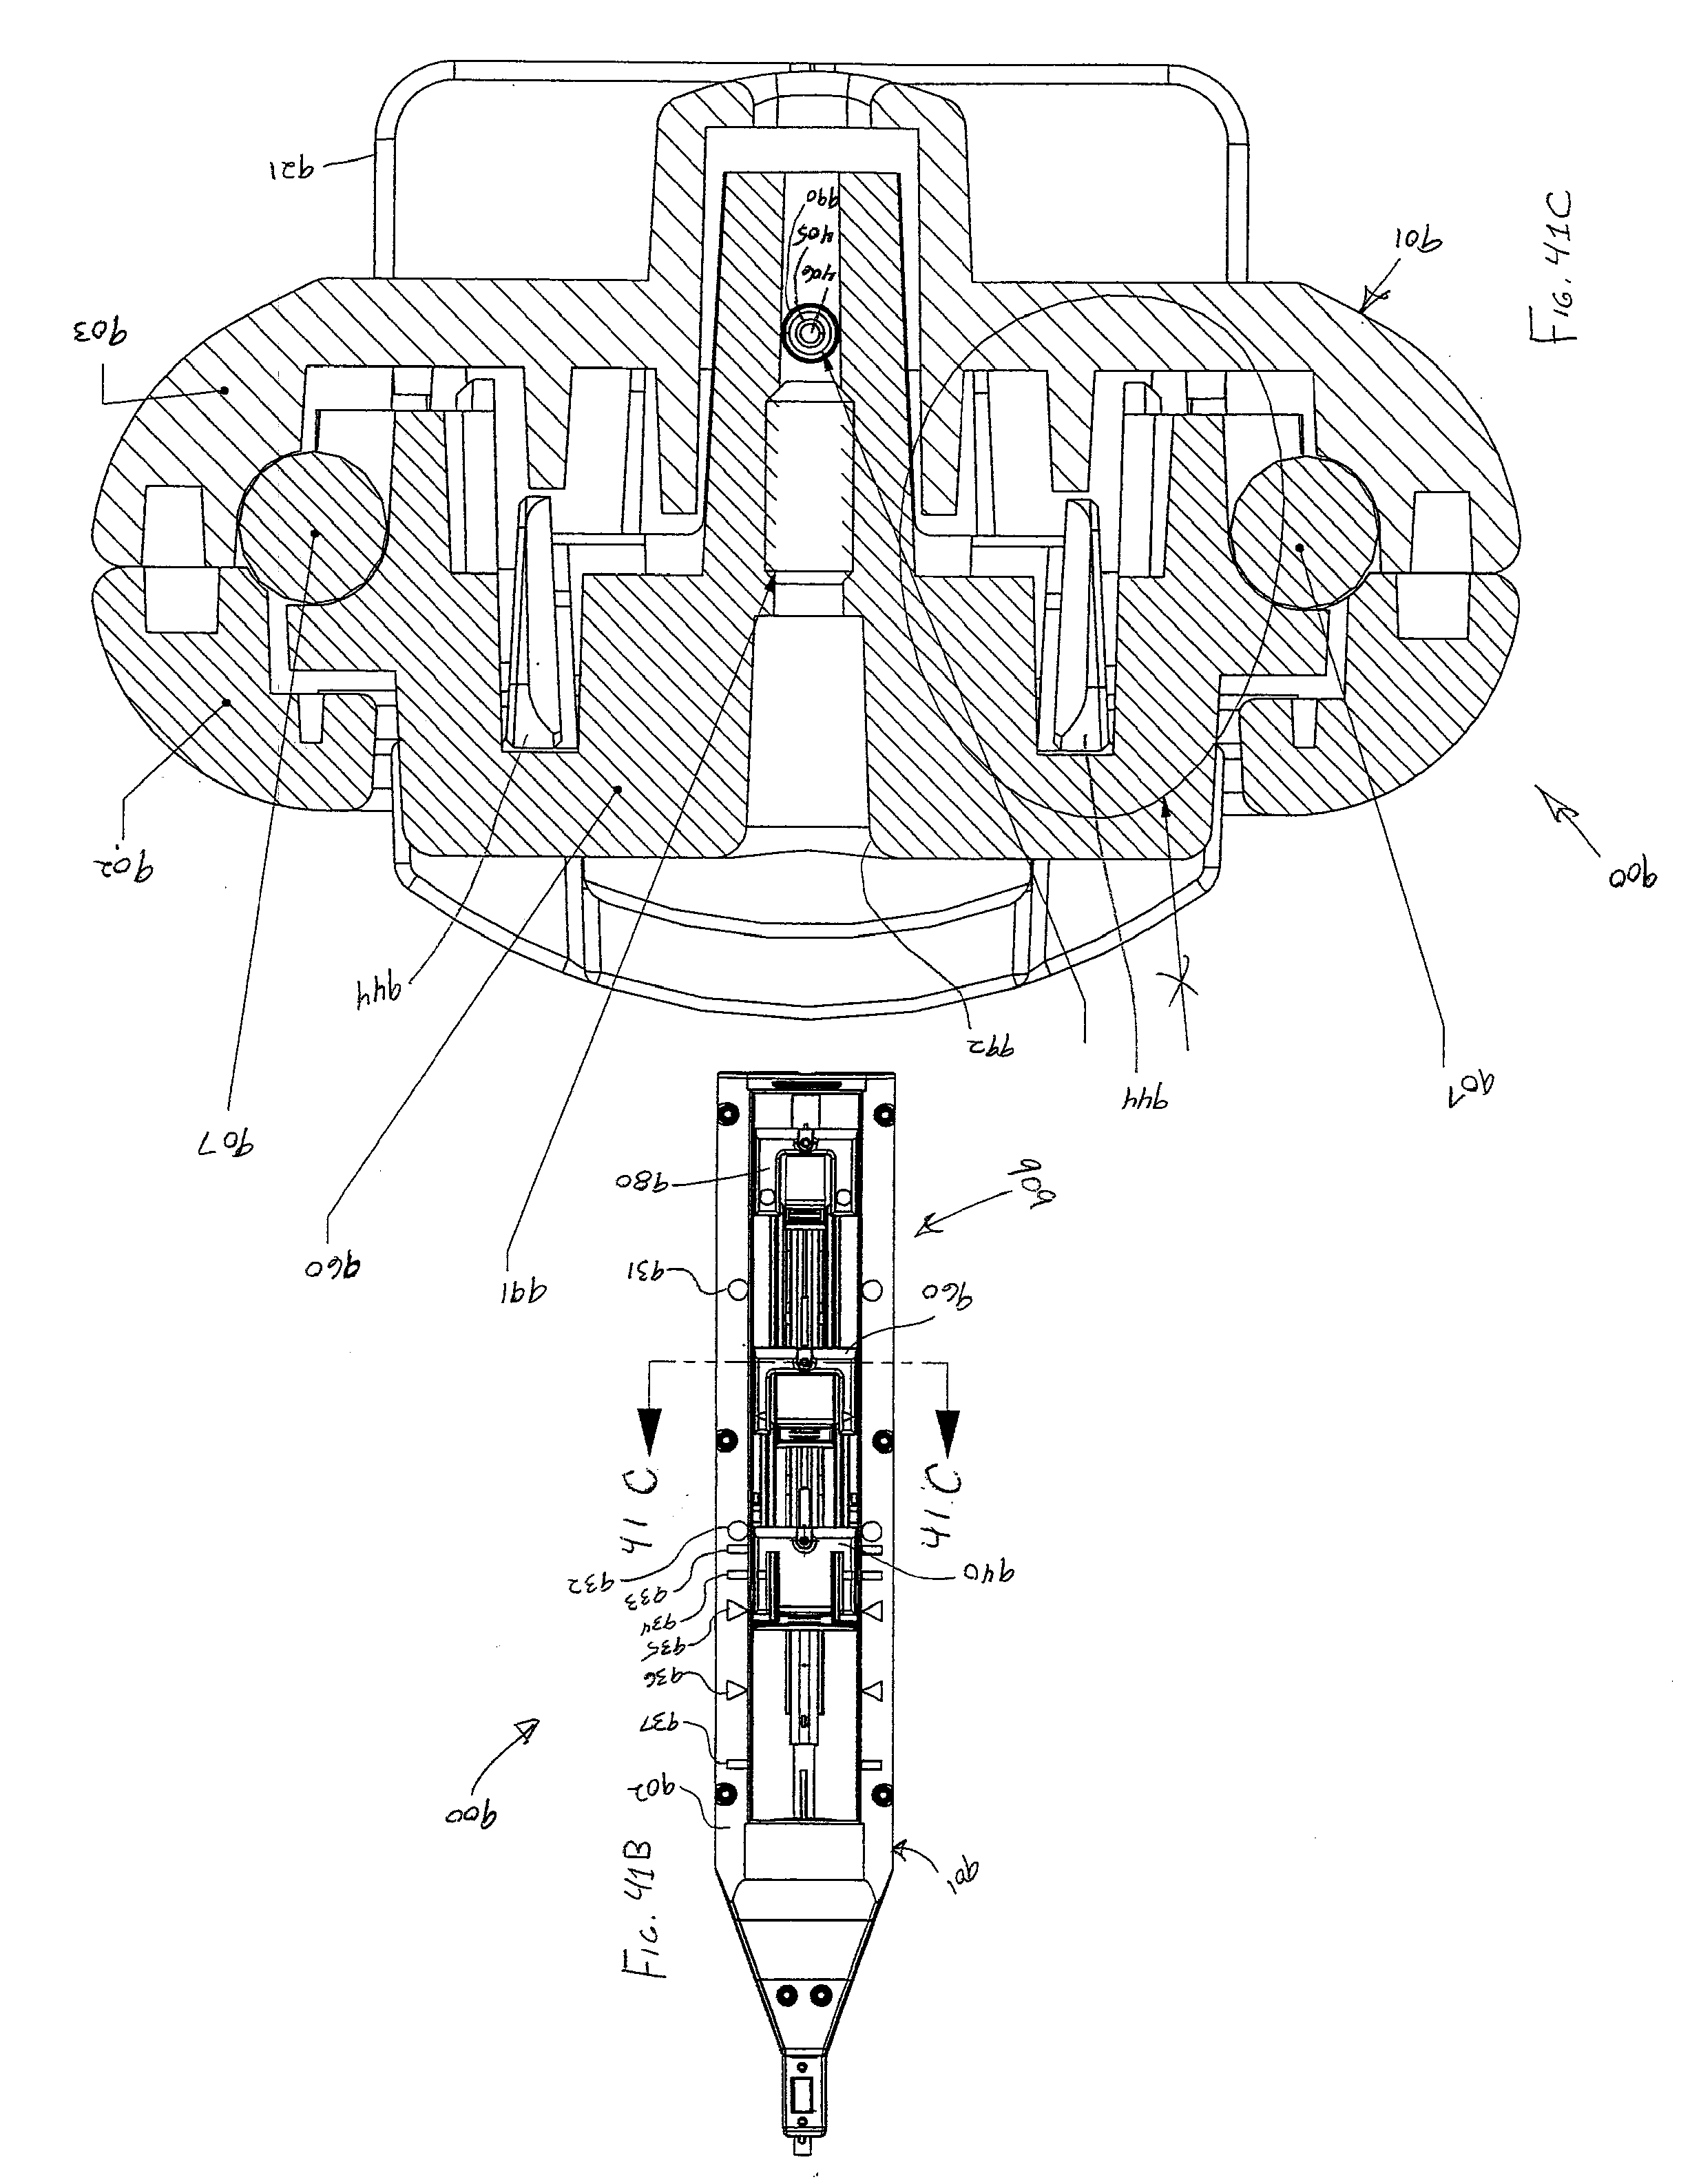 Systems and Methods for Treating Septal Defects